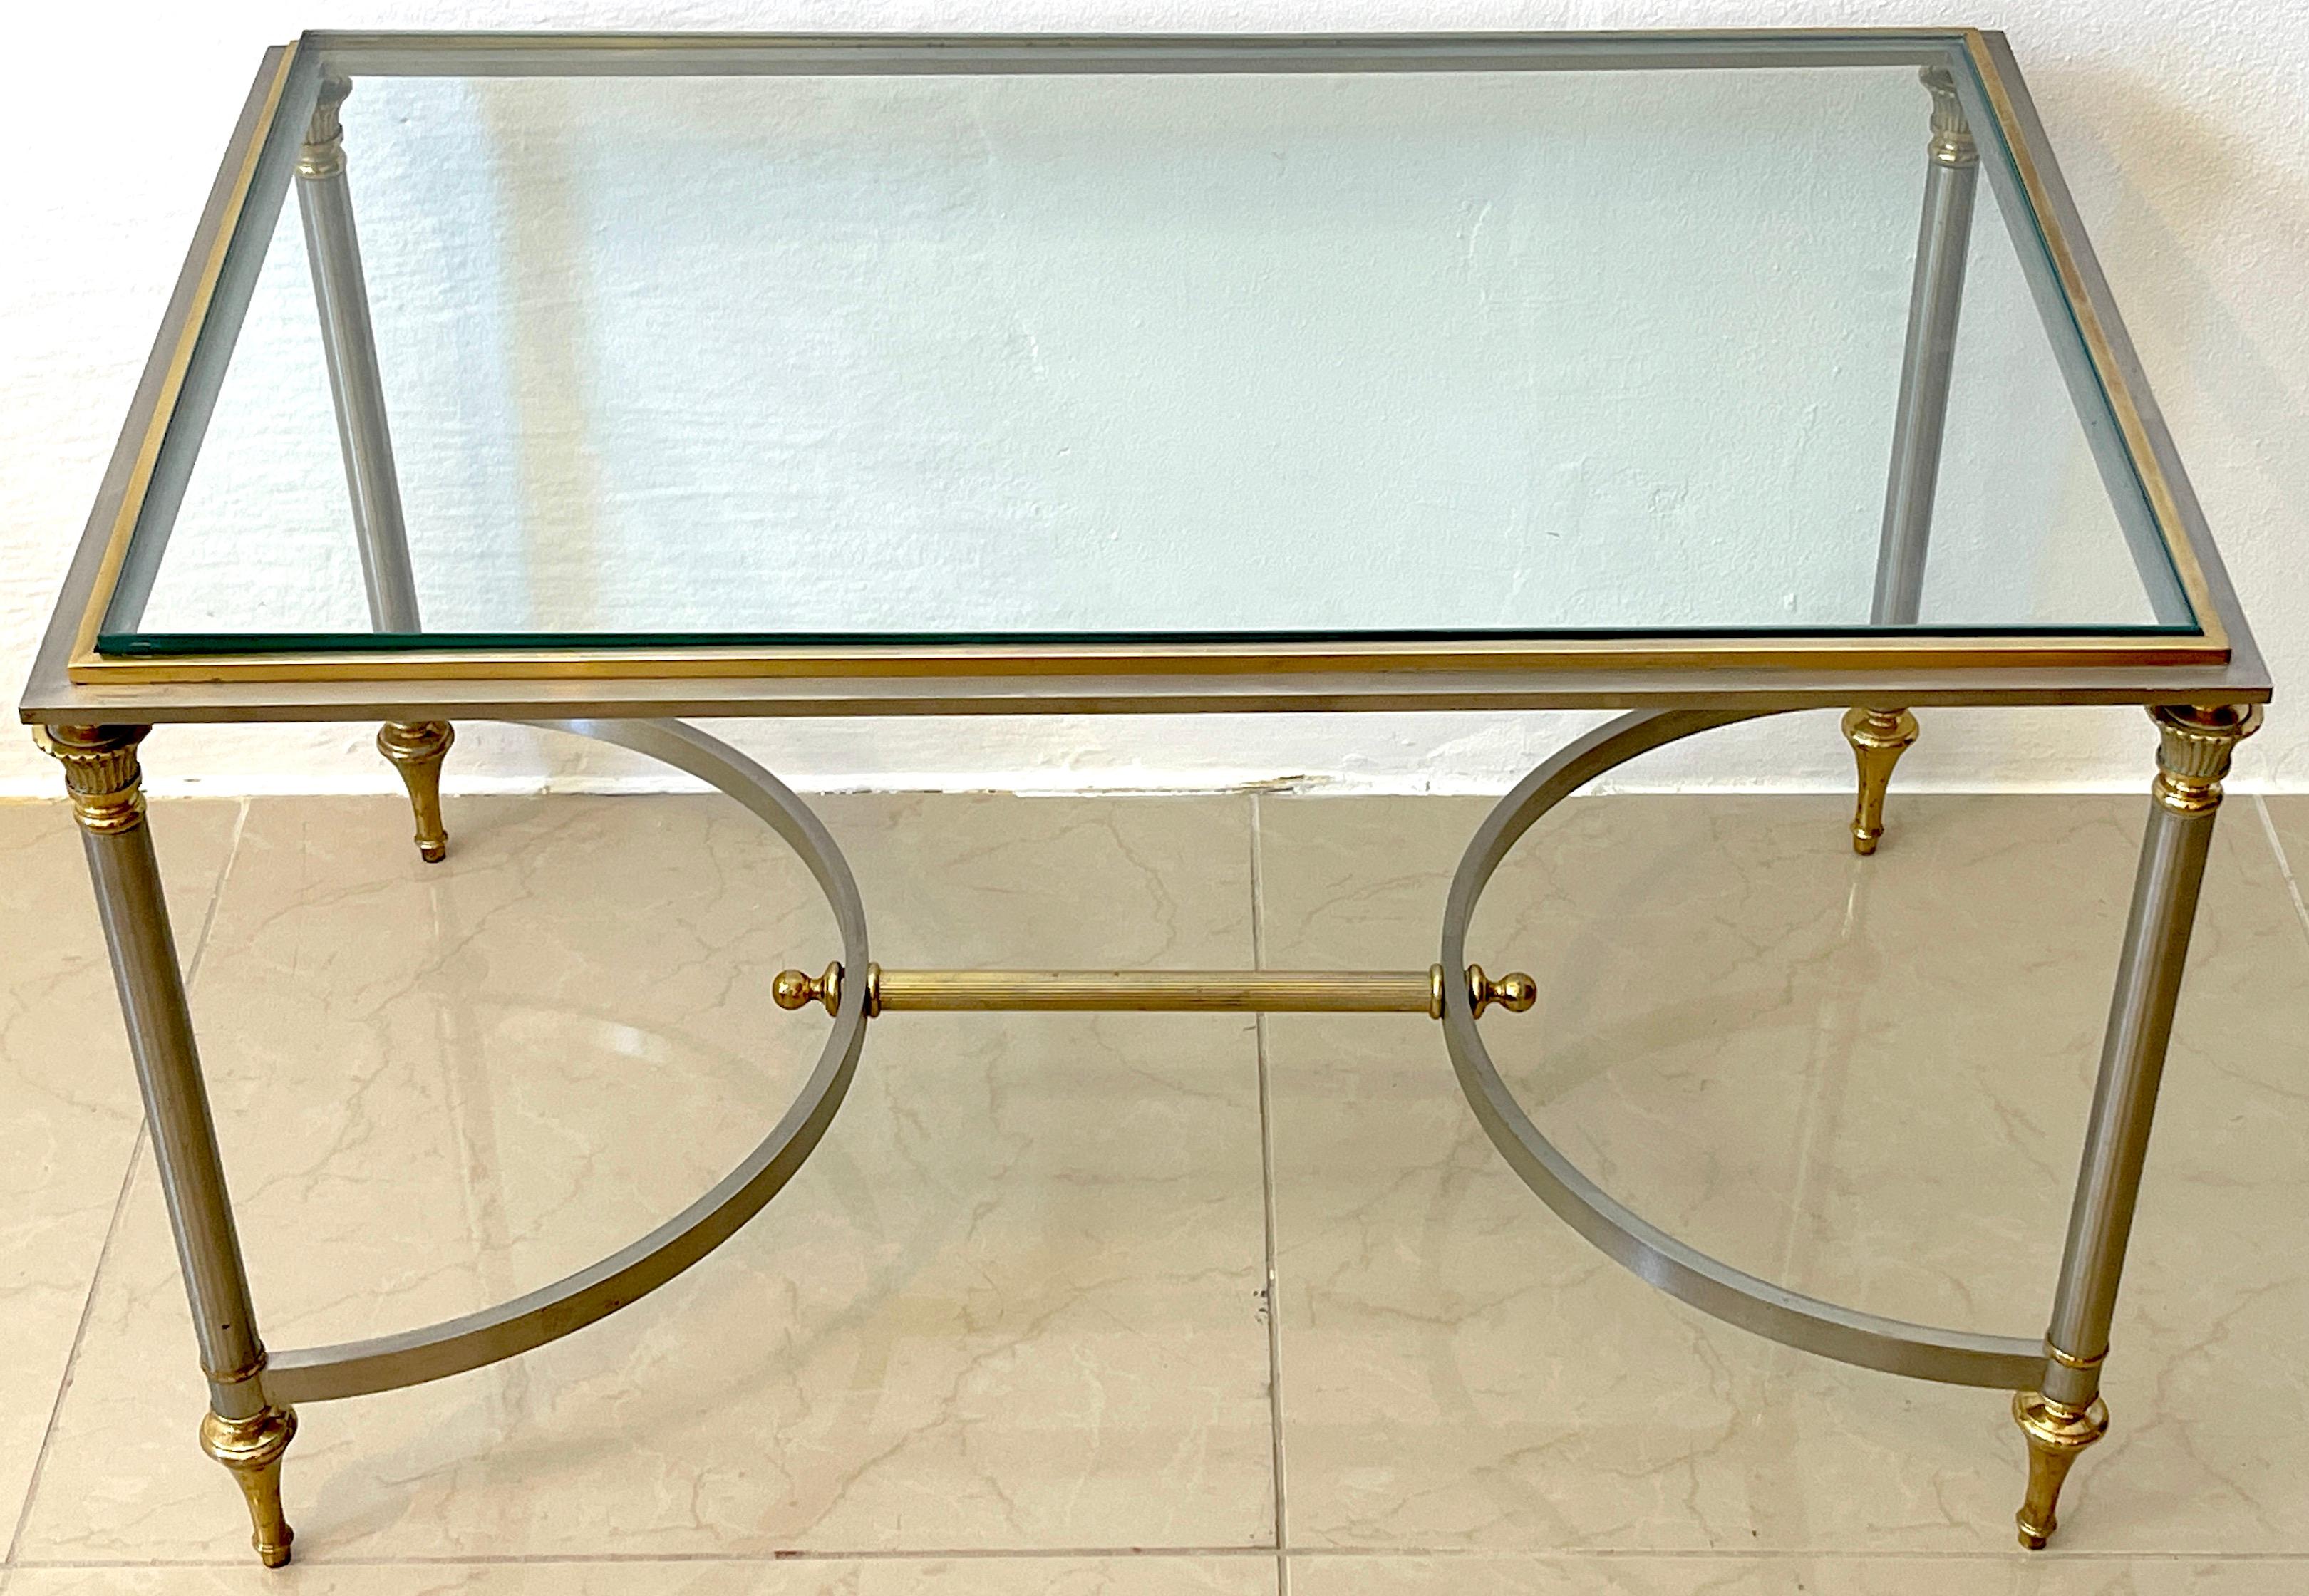 French neoclassical steel & gilt bronze coffee table, style of Maison Jansen, Of rectangular form with inset thick glass top, raised on four column legs joined by center stretcher.